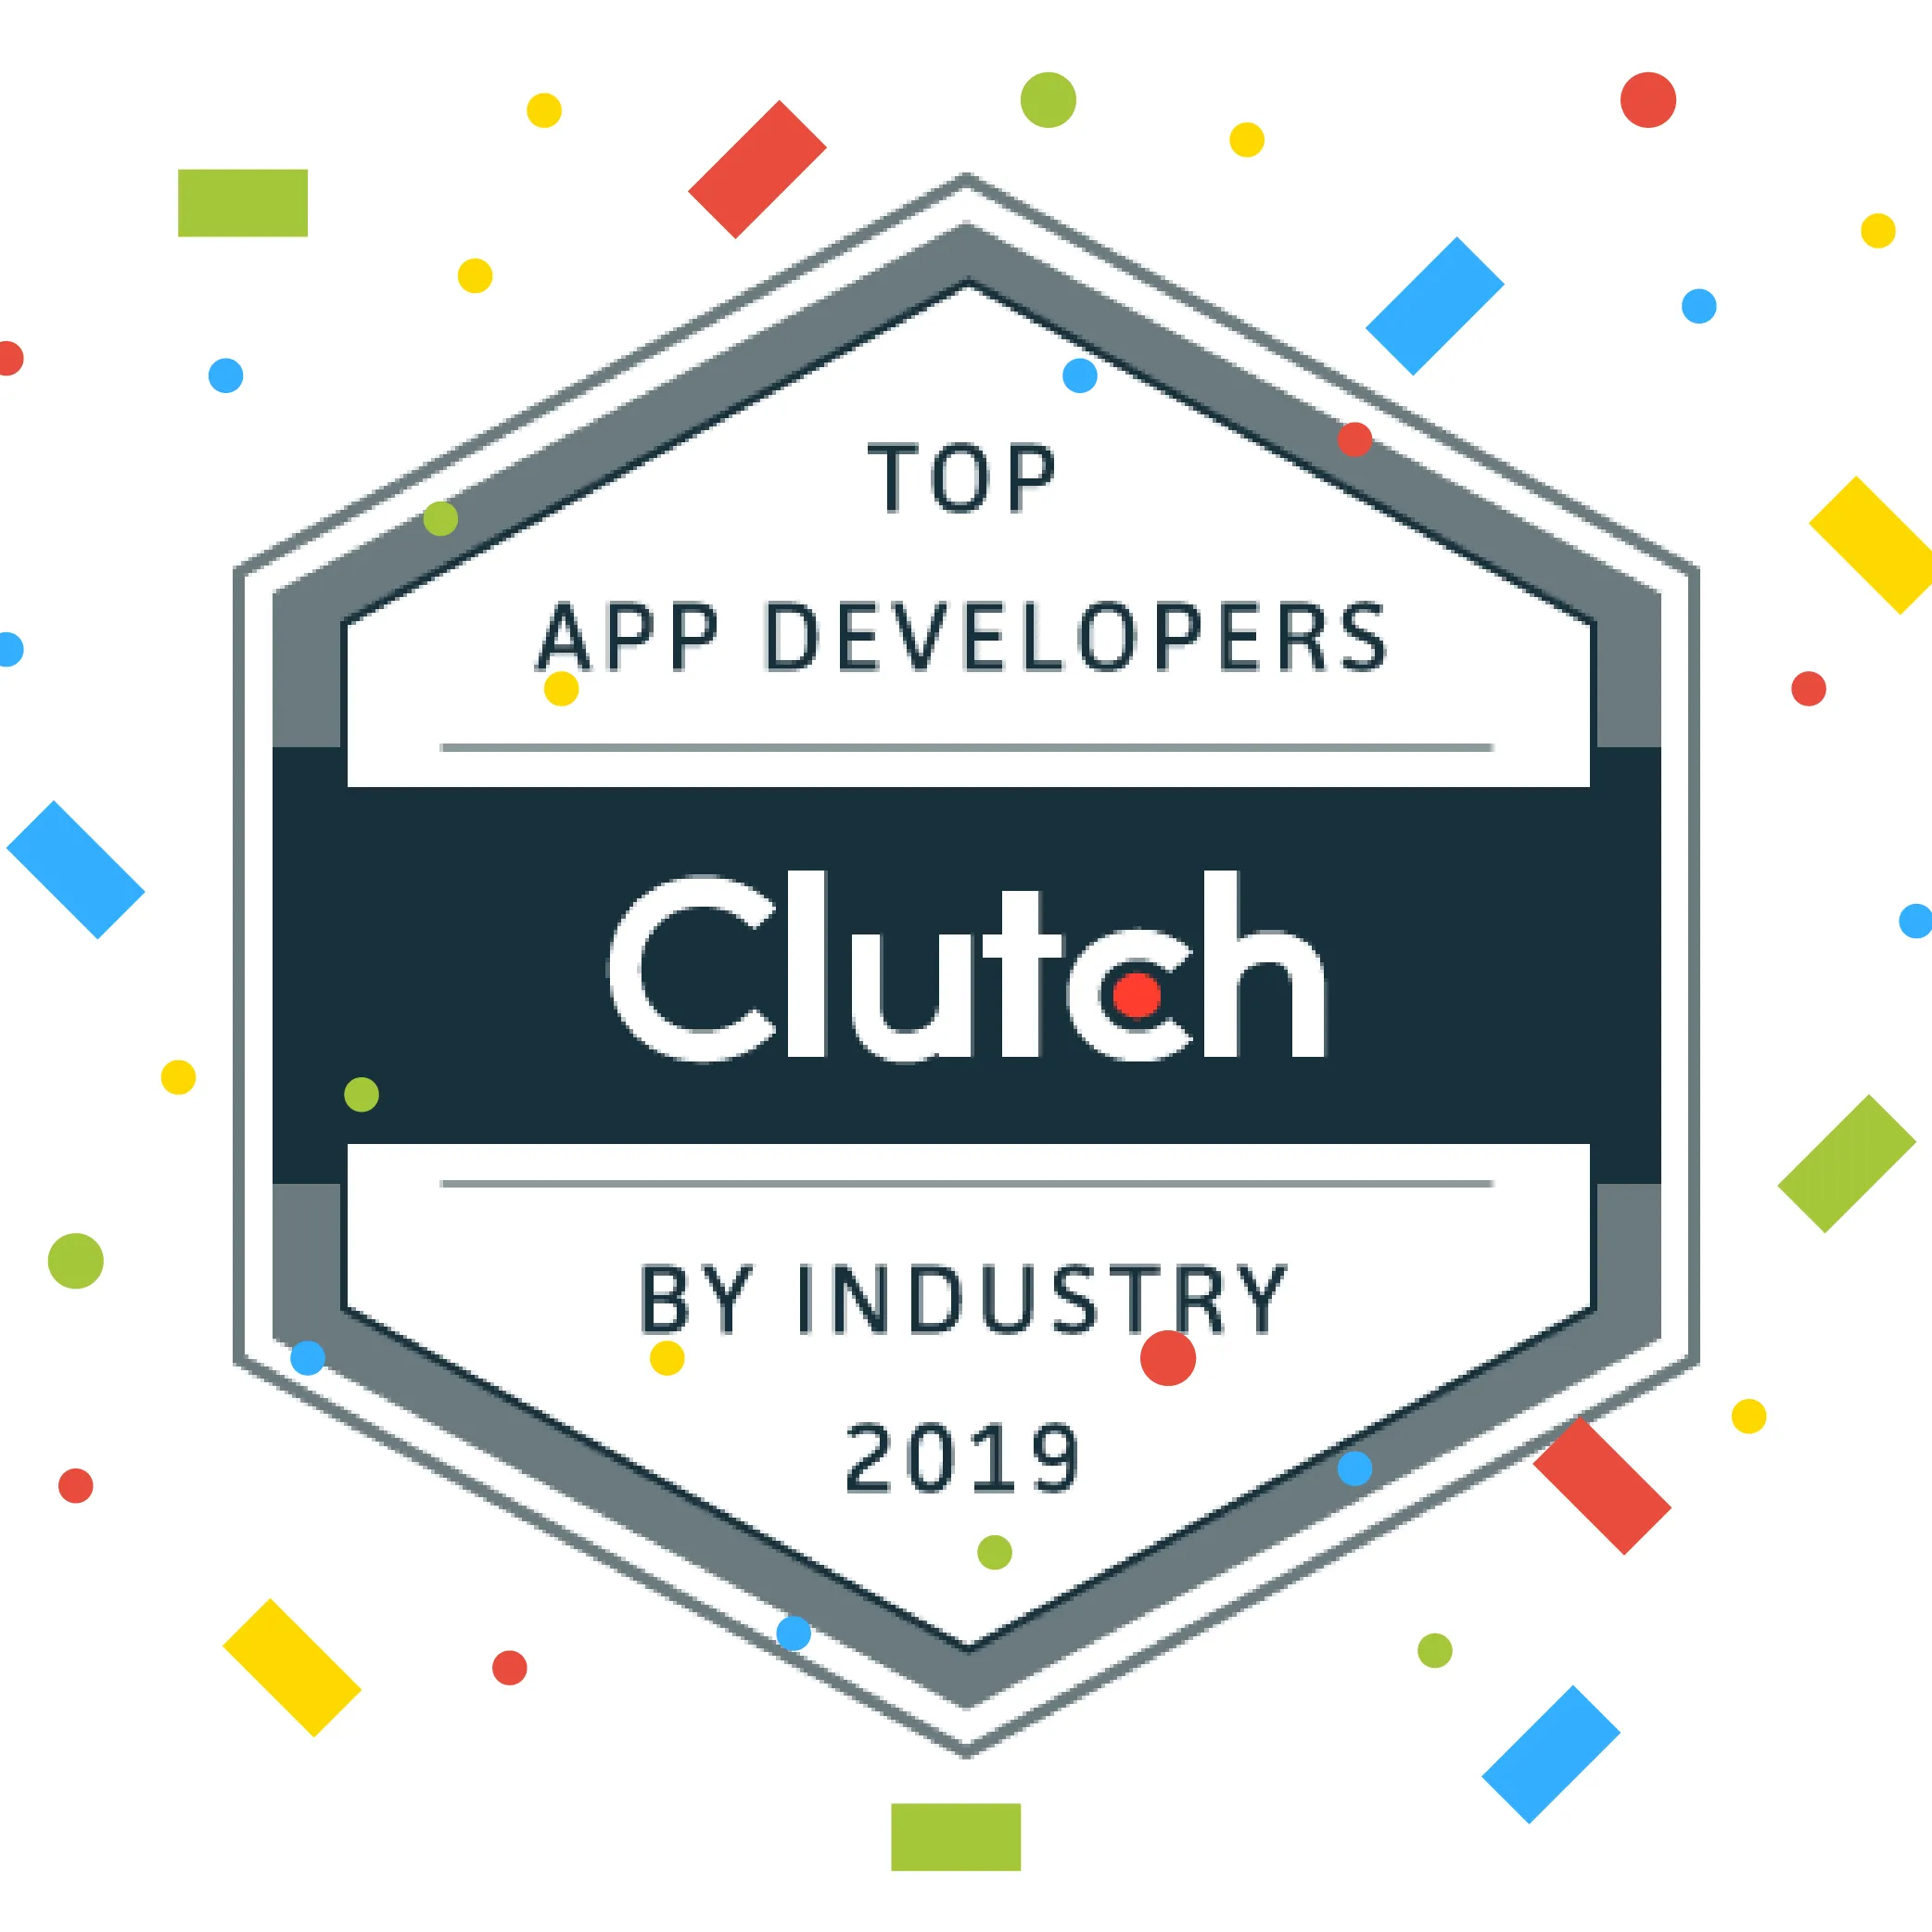 Cleveroad named one of the best mobile app development firms for startups